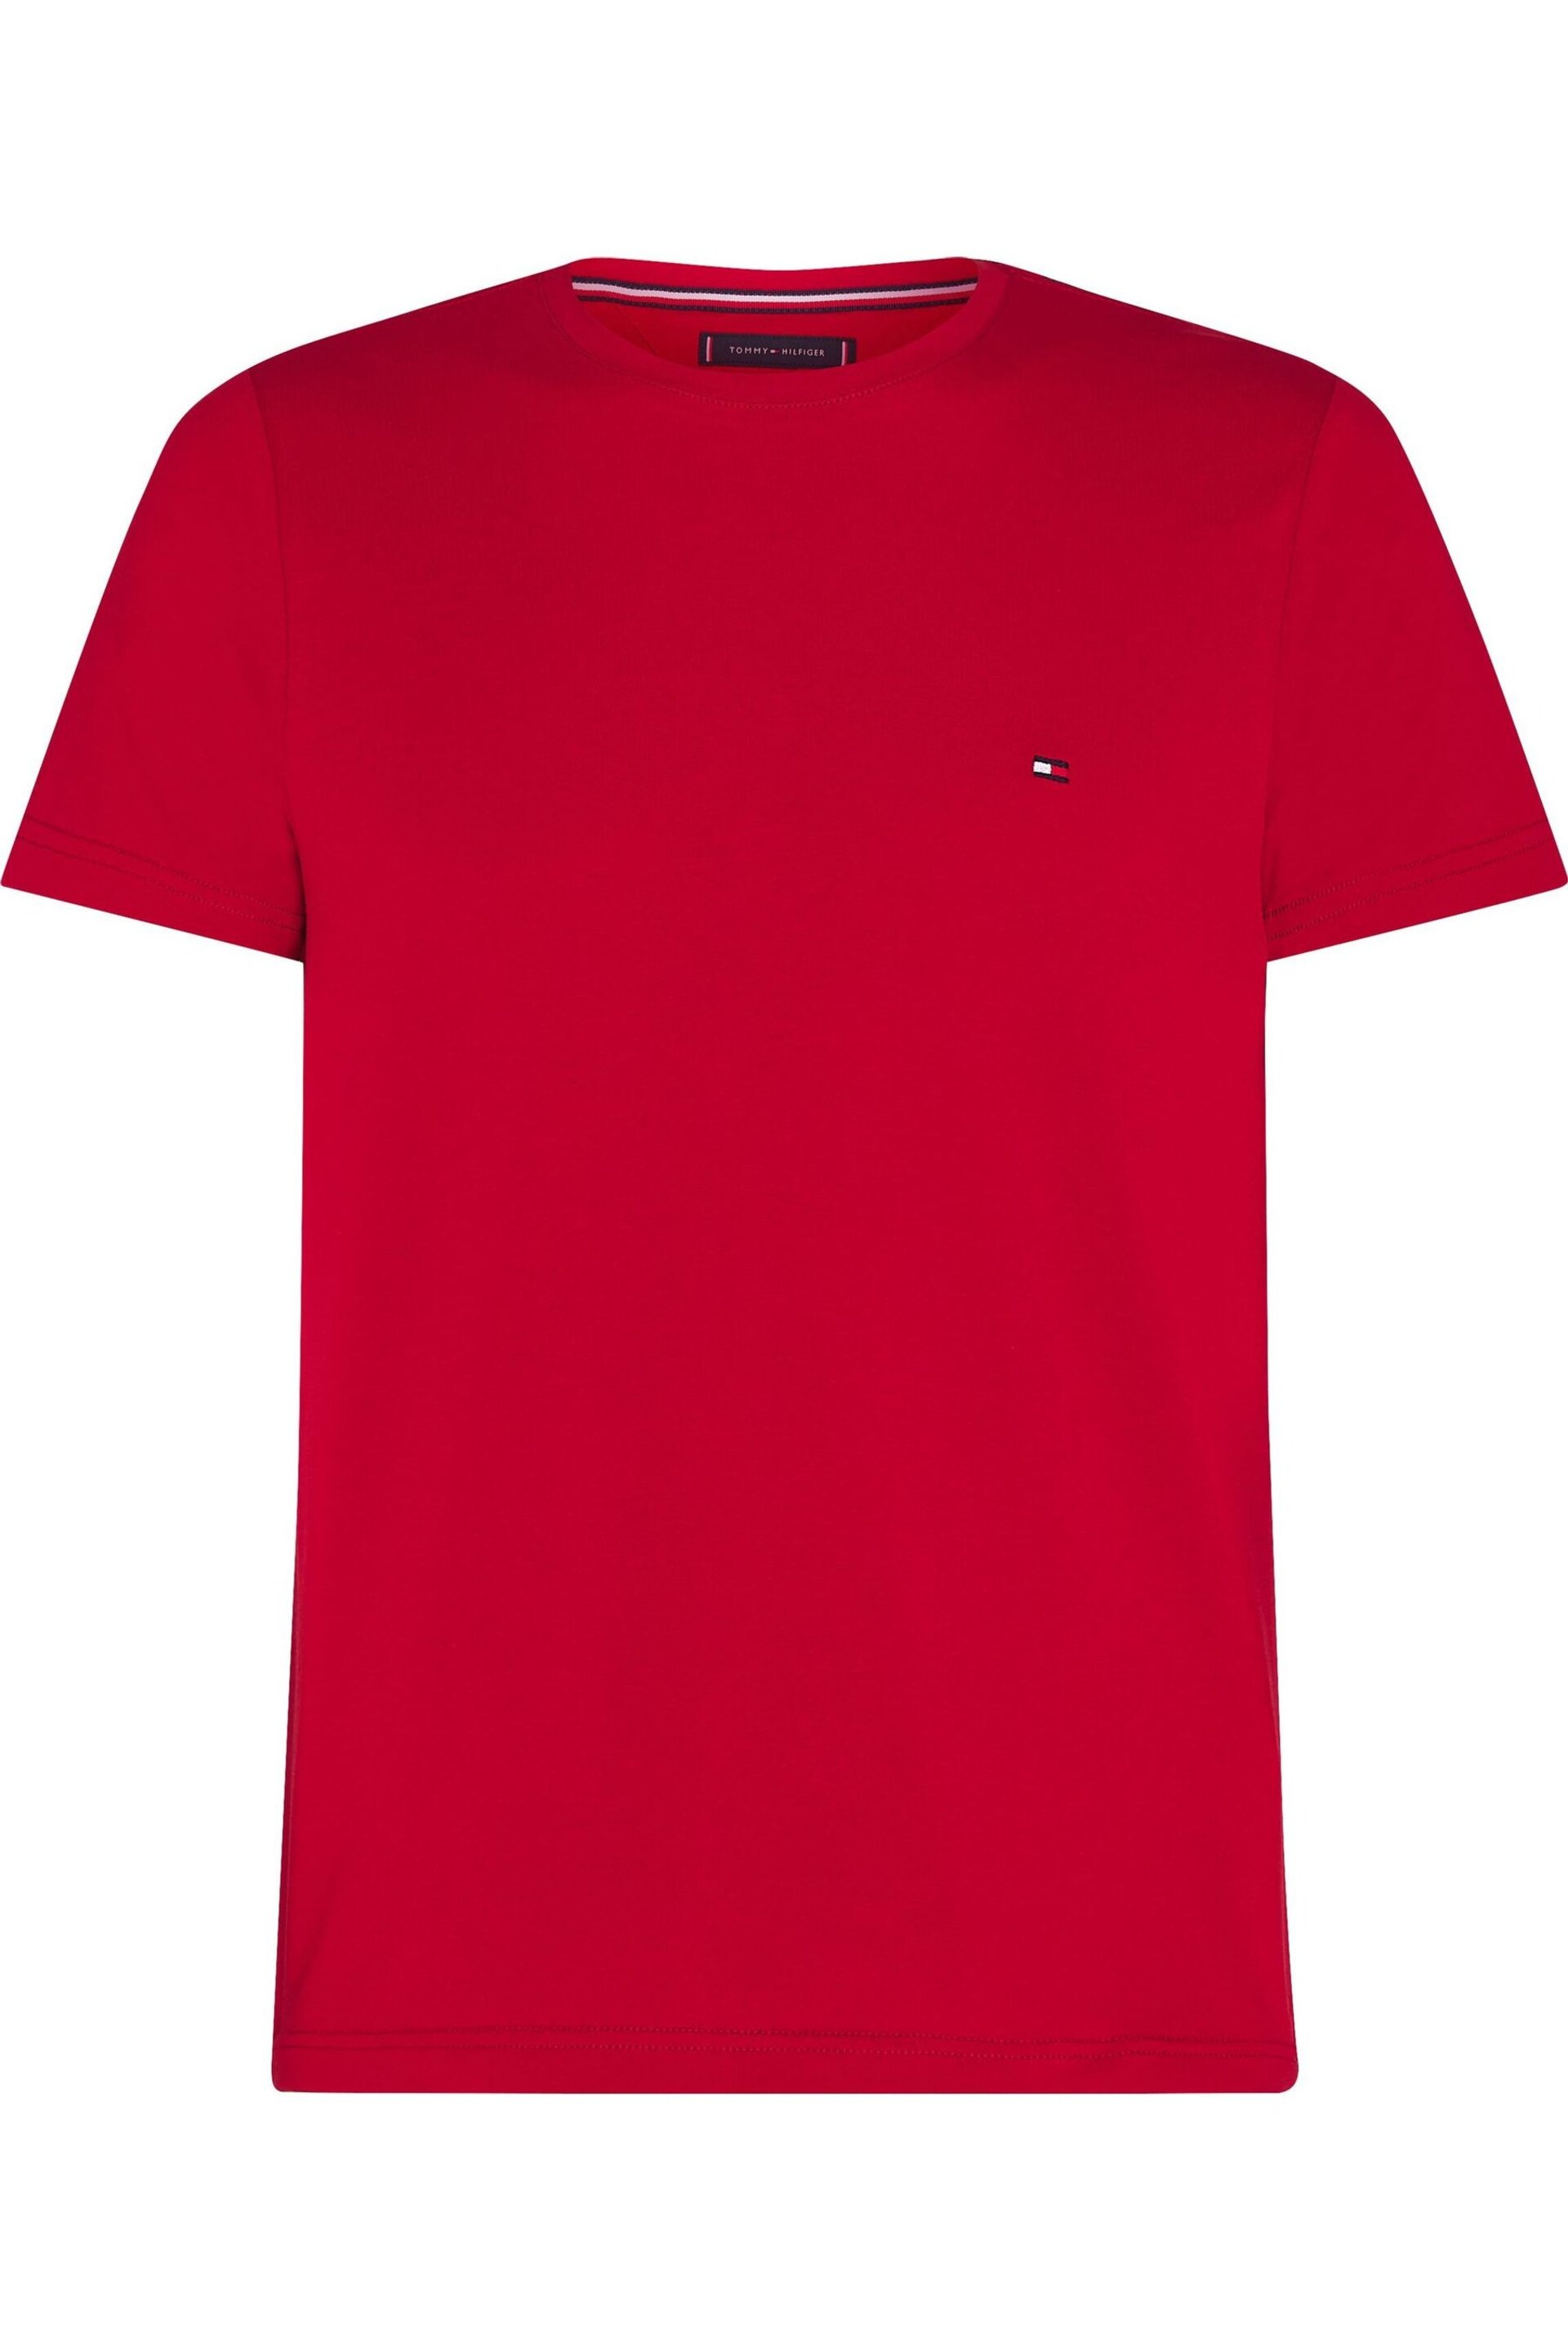 Tommy Hilfiger Core Stretch Slim Fit Crew Neck T-Shirt - Image 1 of 6